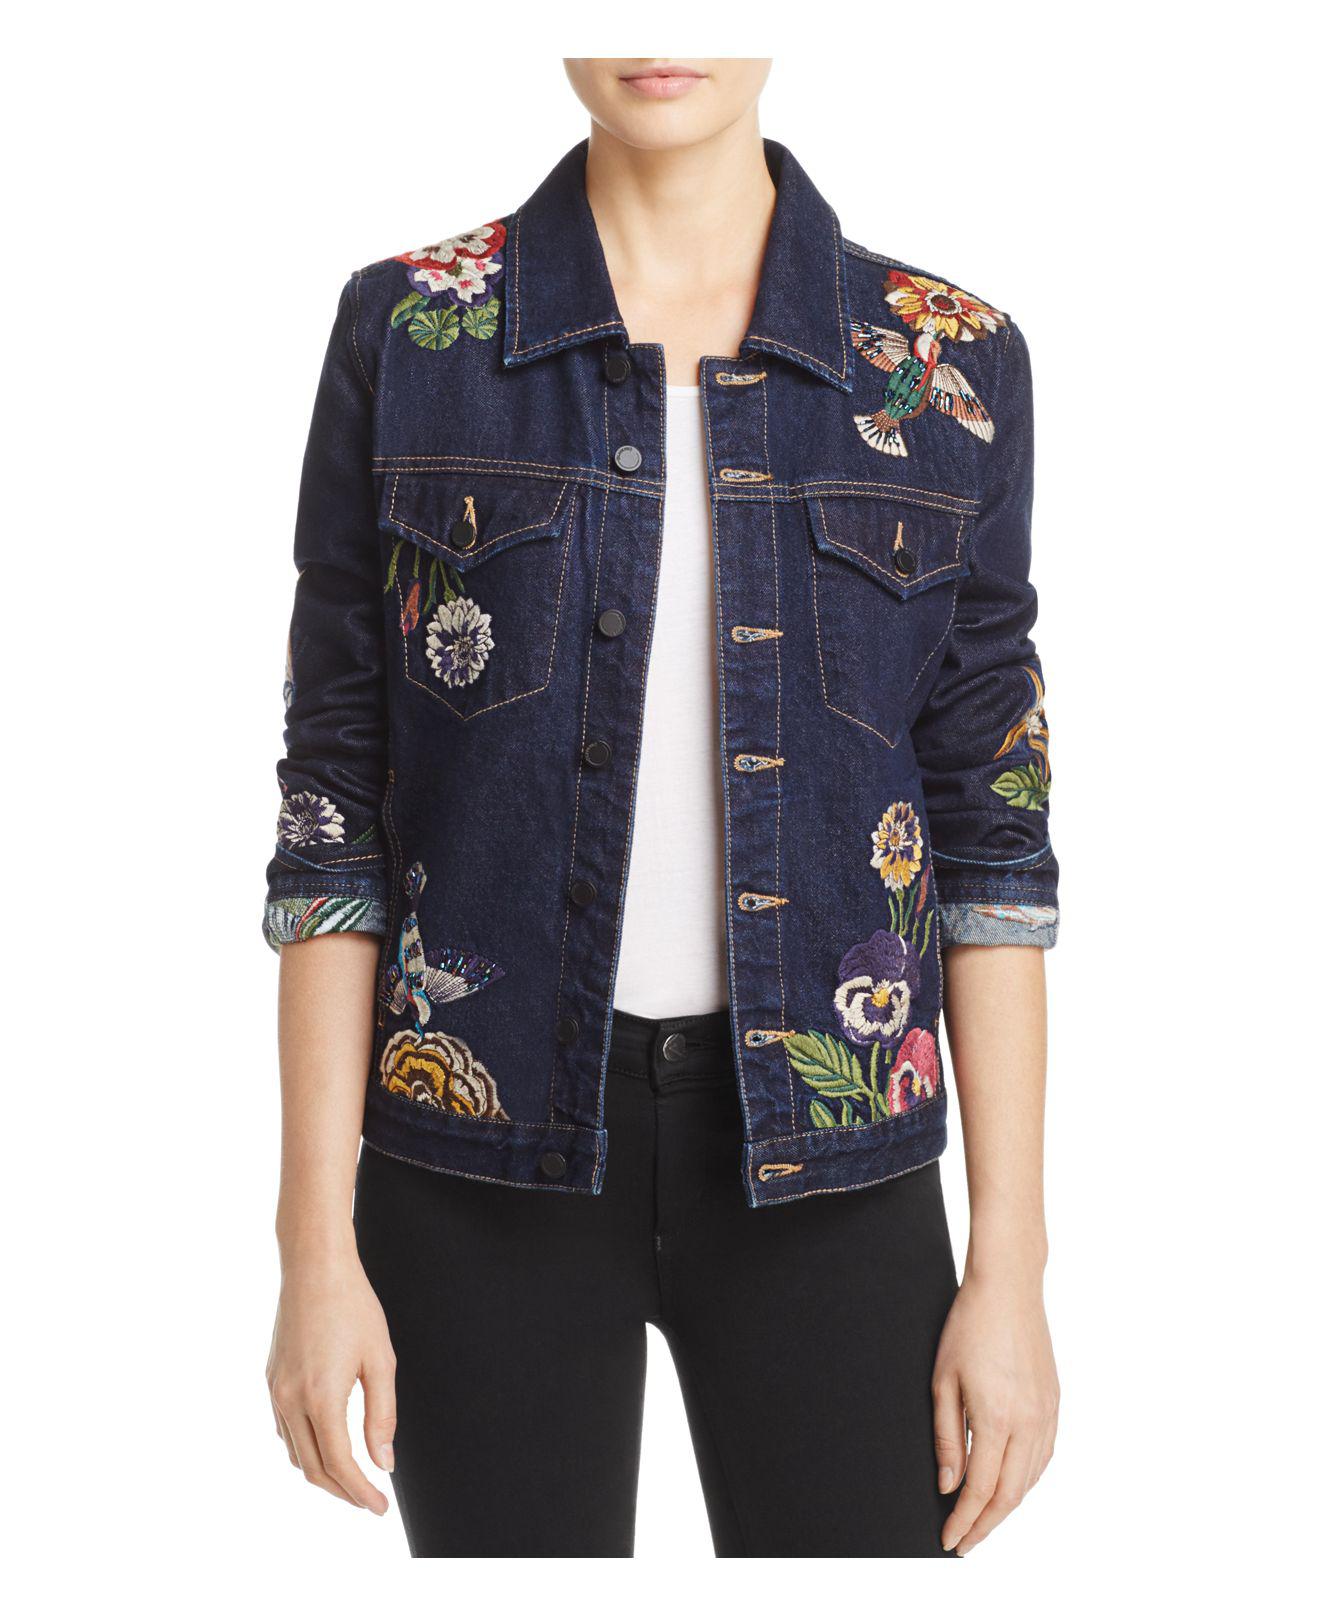 Lyst - Blank Nyc Embroidered Denim Jacket in Blue